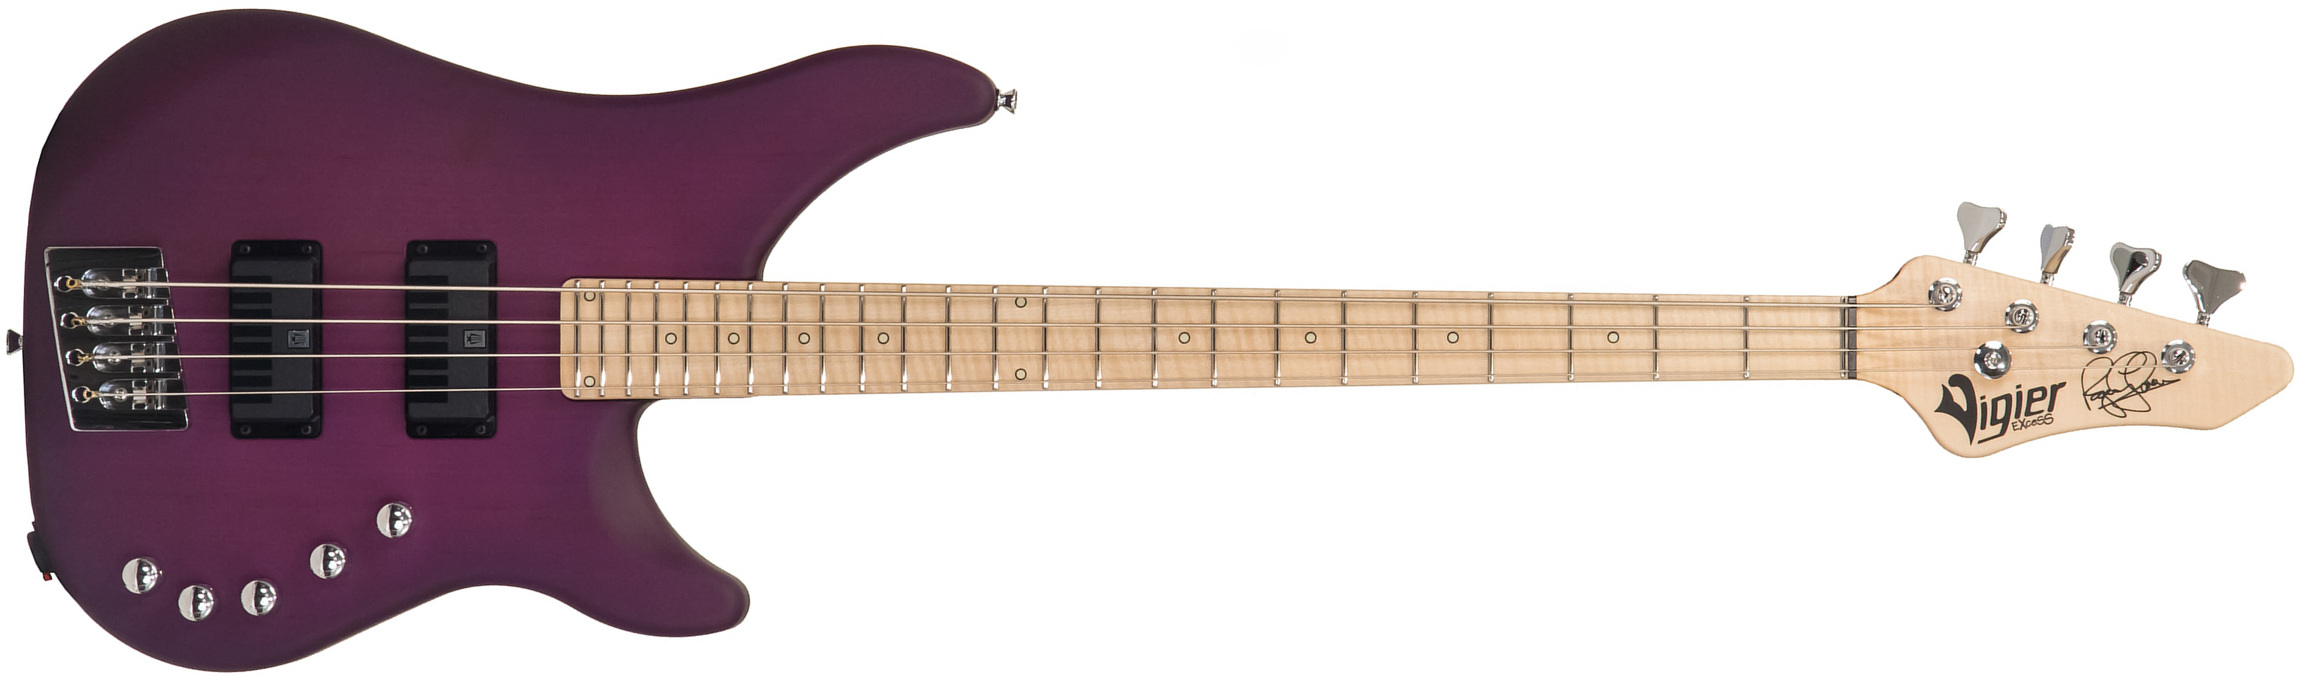 Vigier Roger Glover Excess Original Signature Active Rw - Clear Purple - Solid body electric bass - Main picture